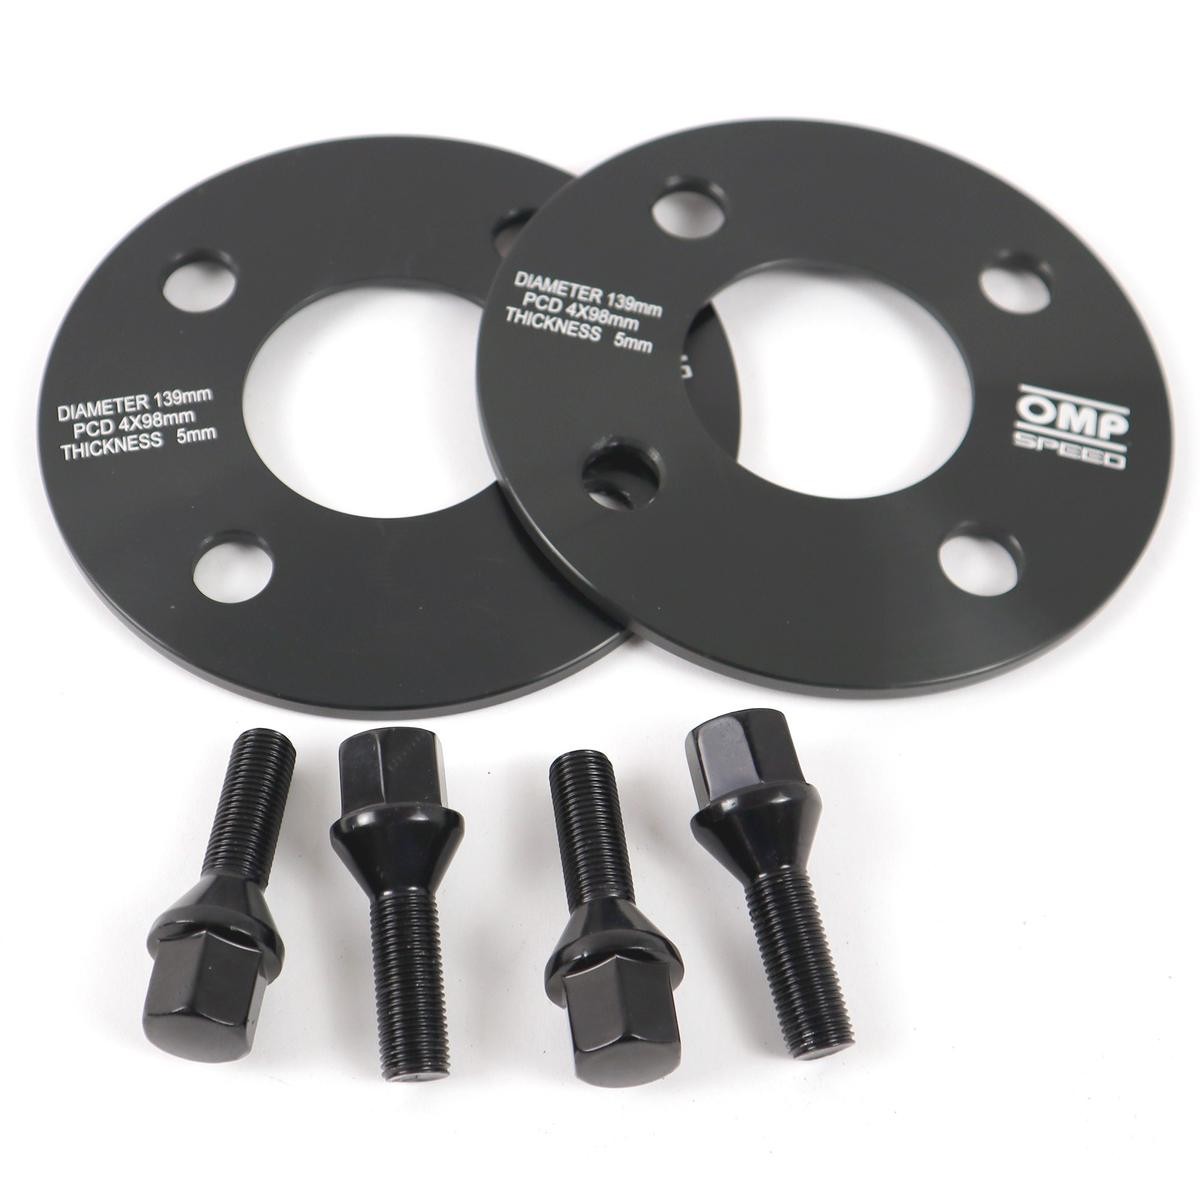 OMP OMPS08360501 Hub centric wheel spacers 4x98, 5 mm